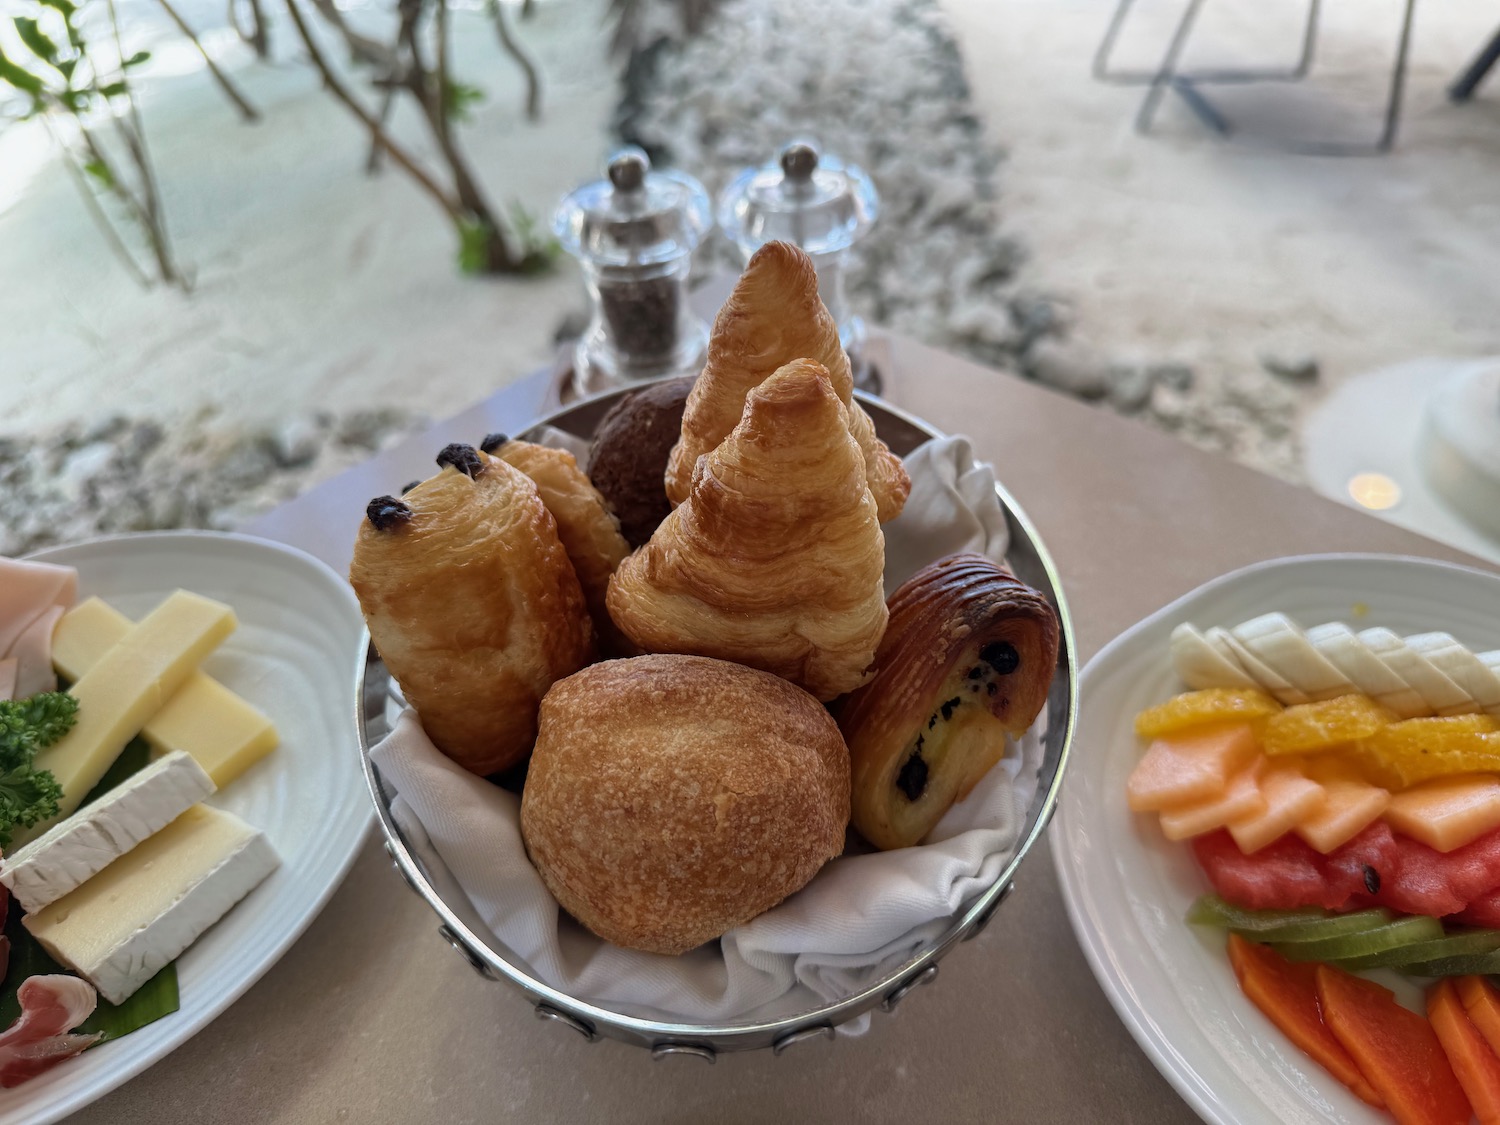 a bowl of pastries and fruit